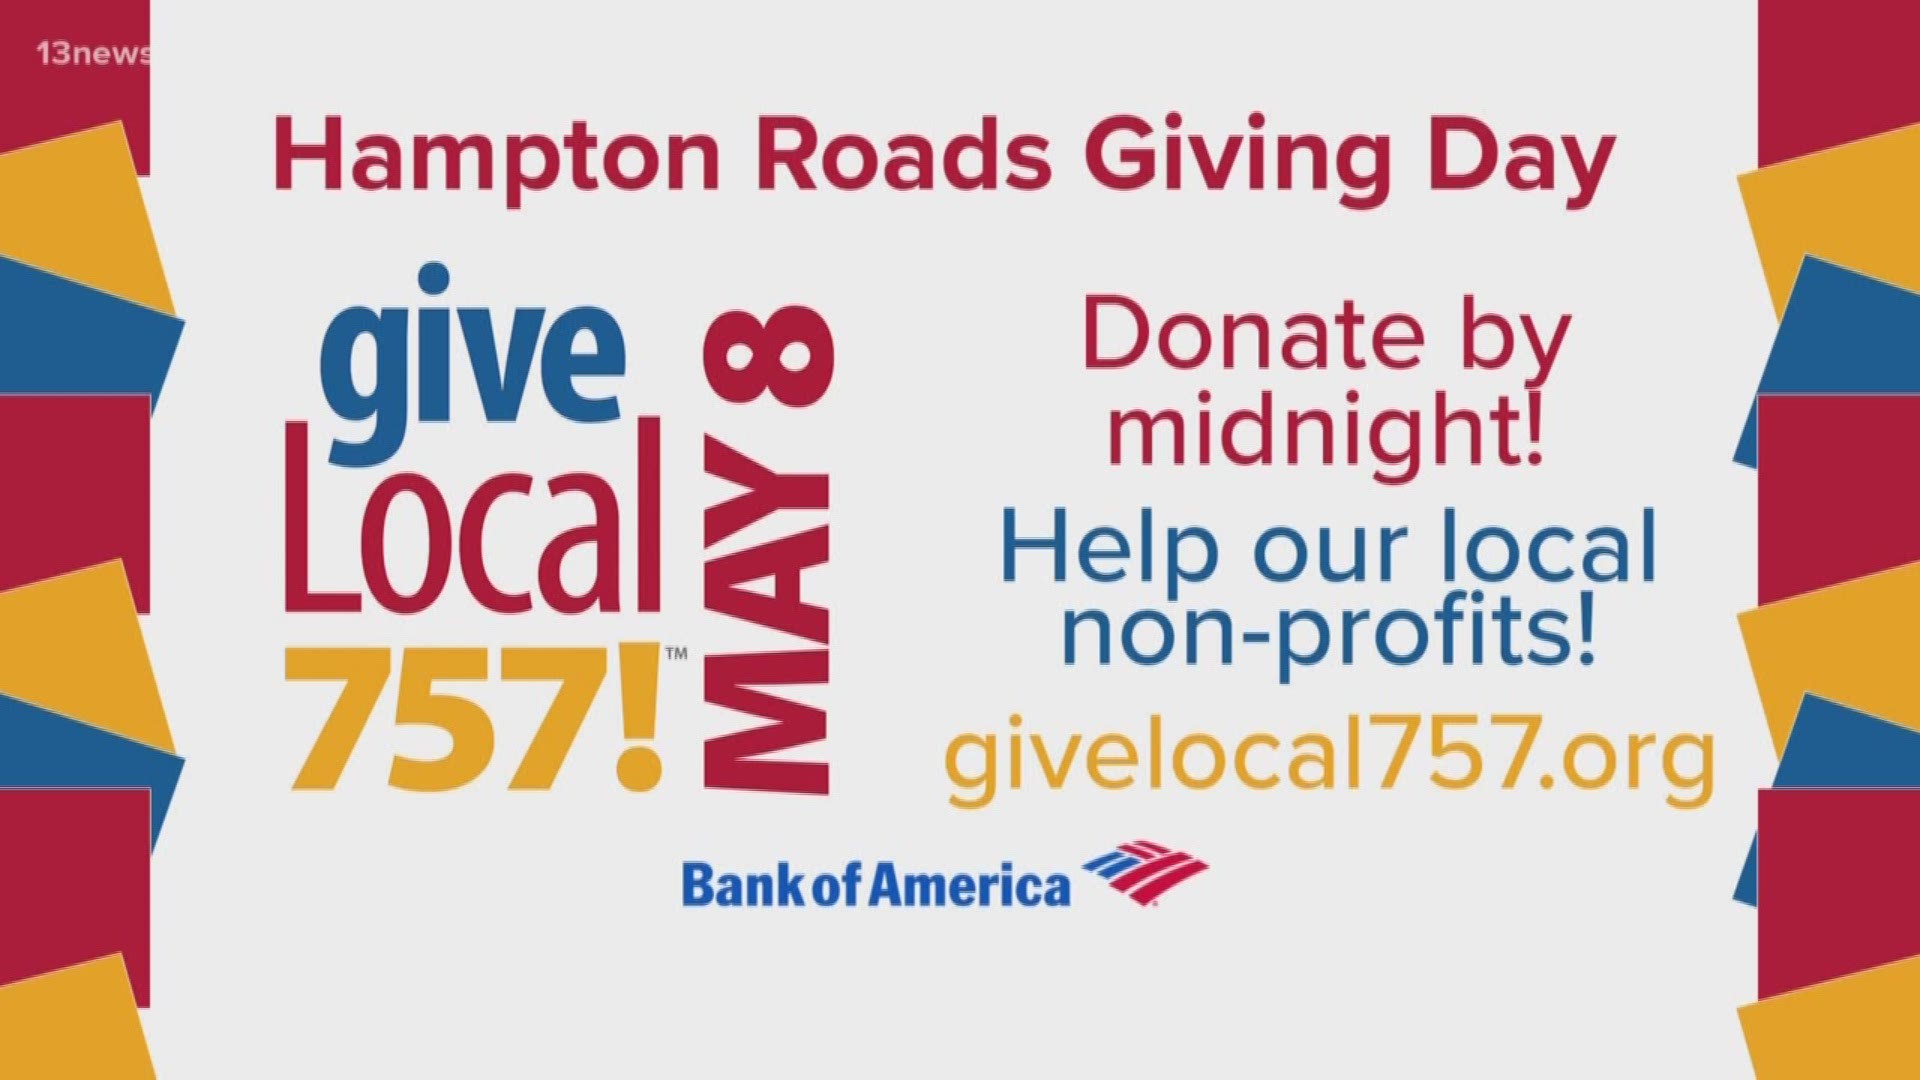 Hampton Roads will hold its 5th annual Giving Day!